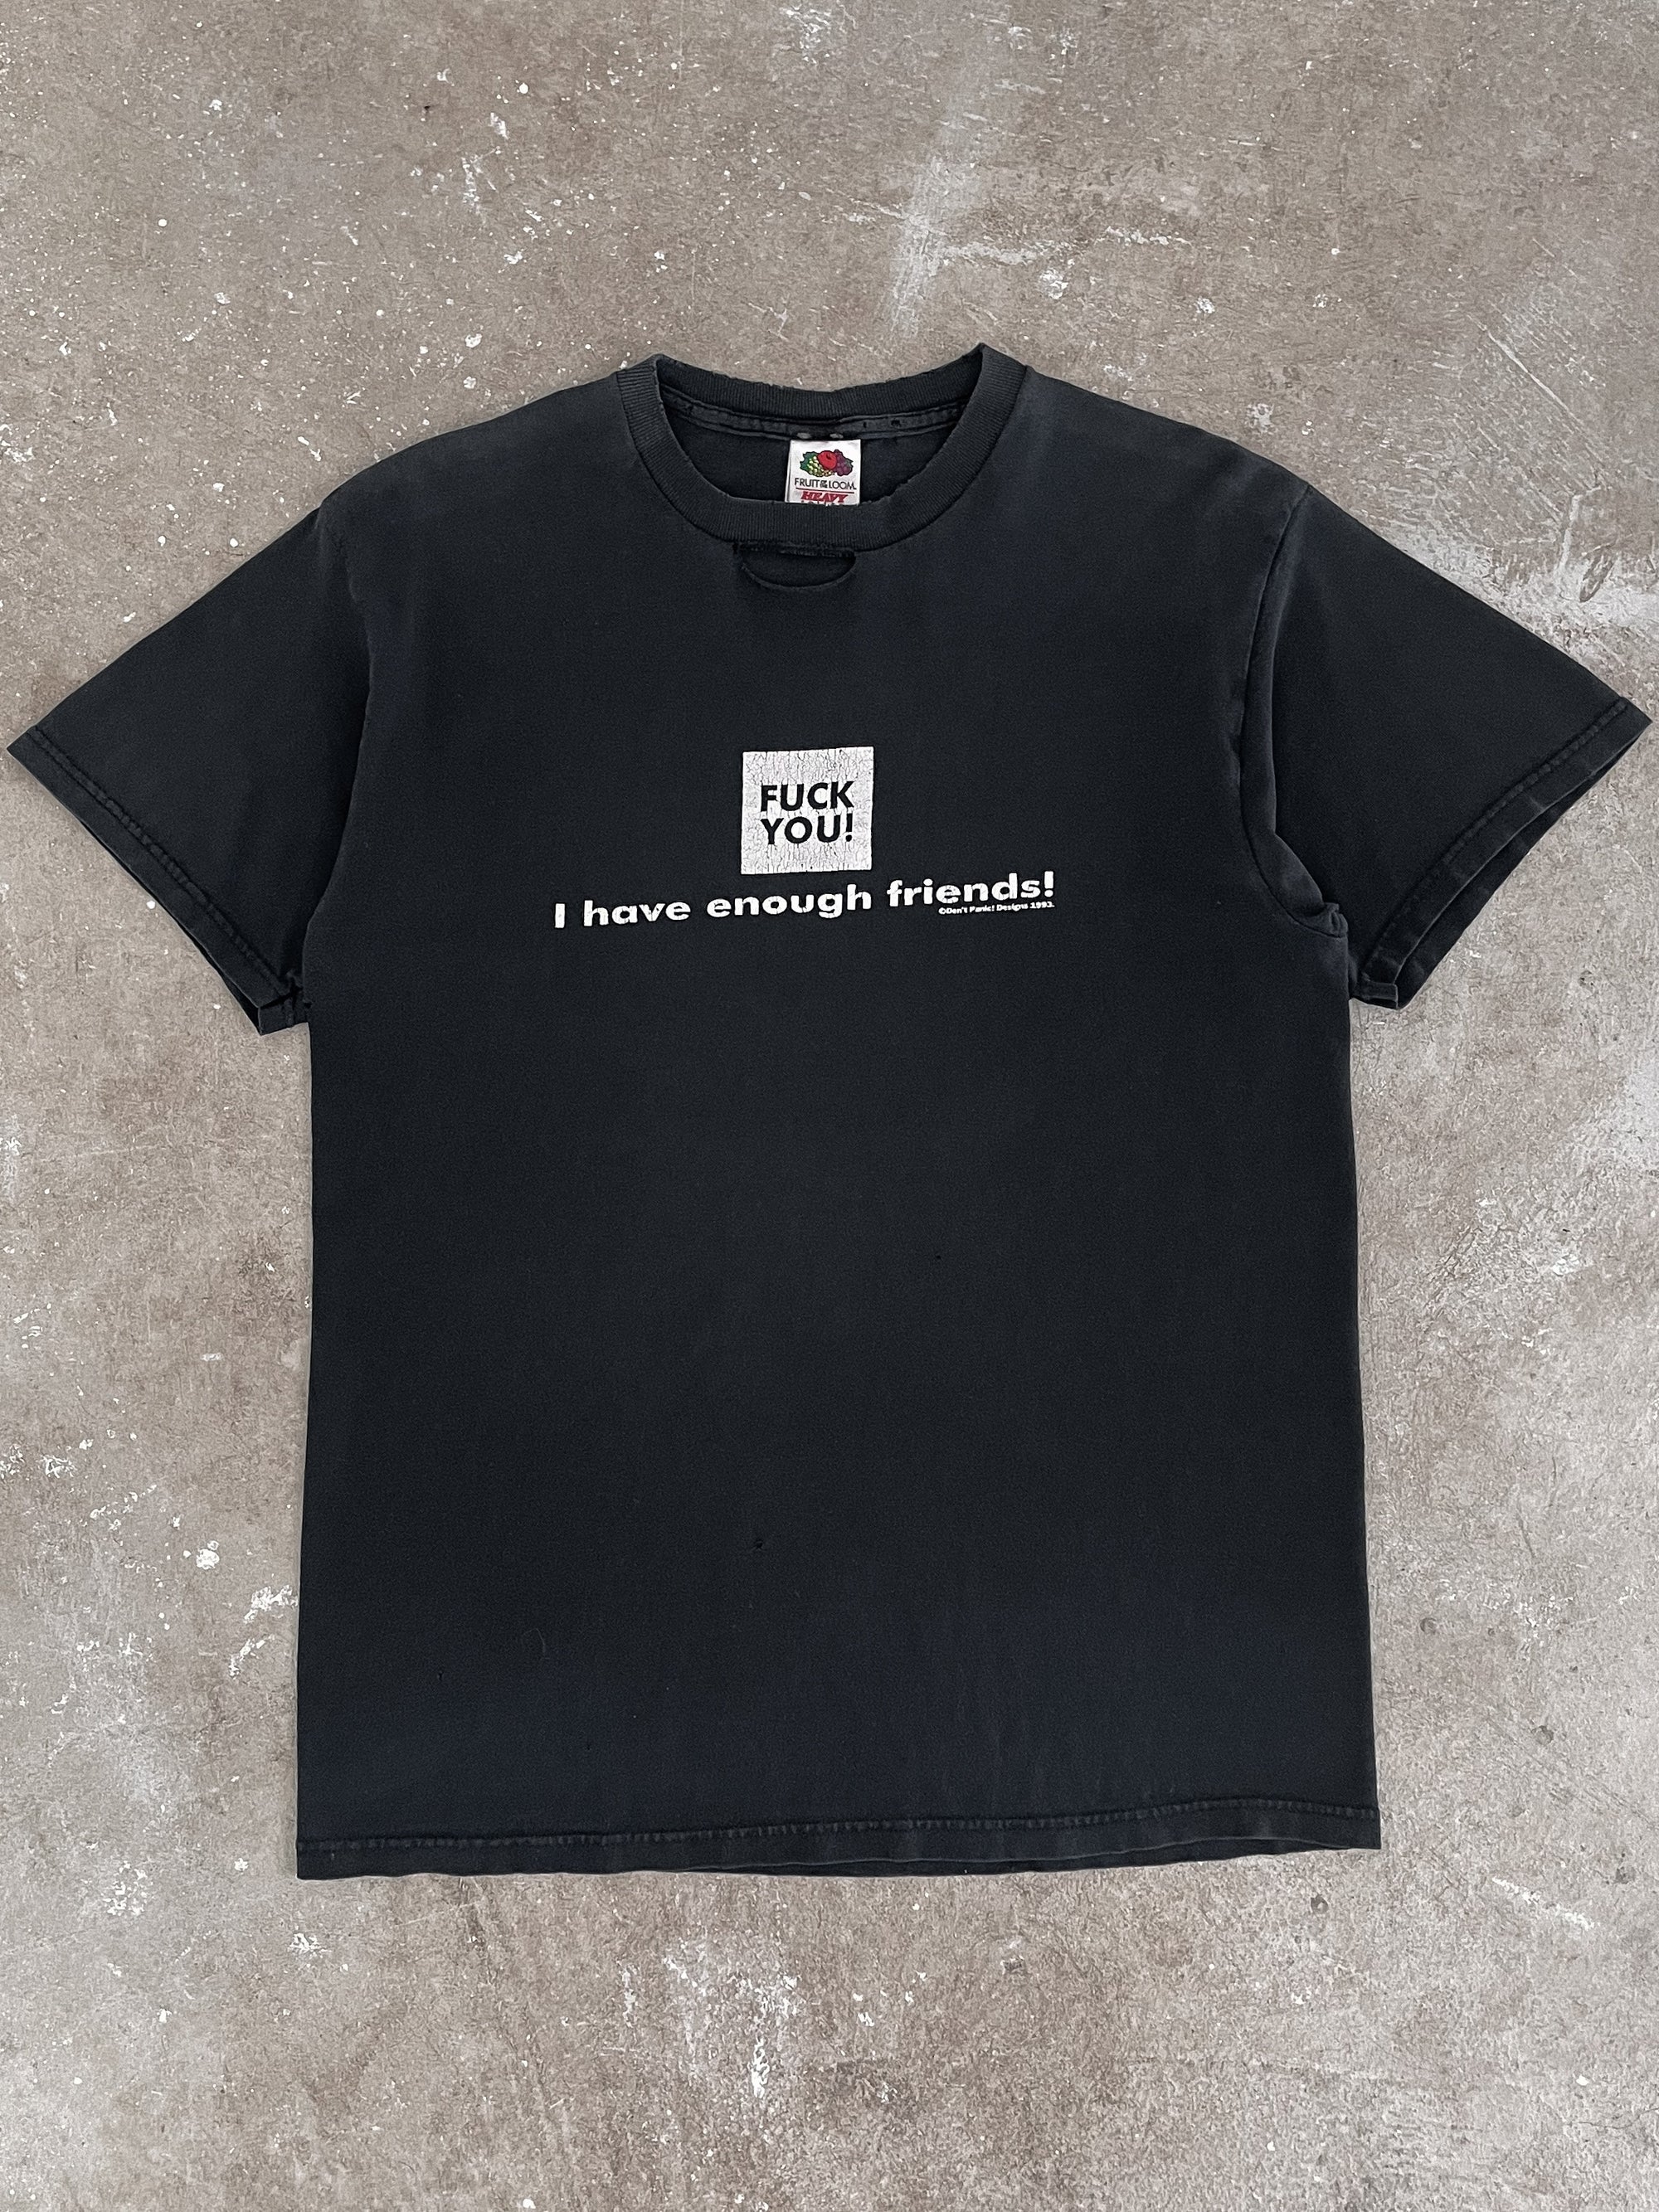 2000s “Fuck You! I Have Enough Friends” Distressed Tee (M)